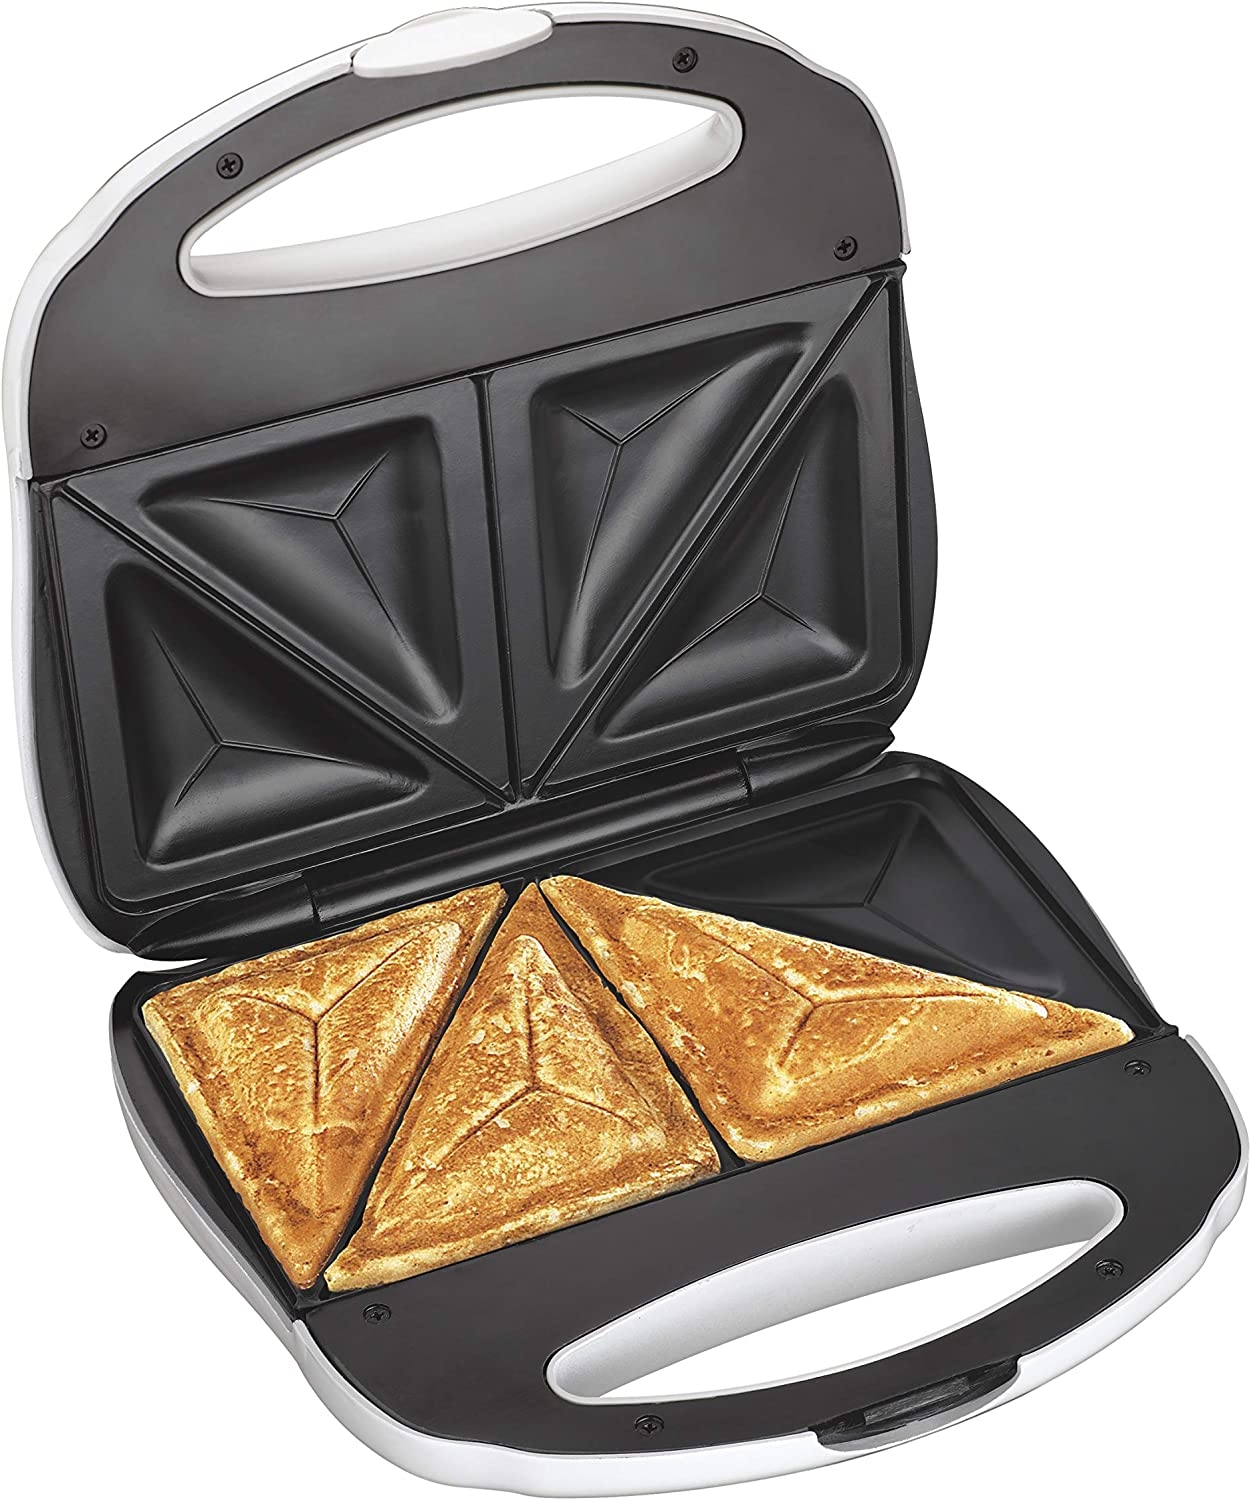 Proctor Silex Deluxe Hot Sandwich Maker, Nonstick Plates, Stainless Steel (25415) Import To Shop ×Product customization General